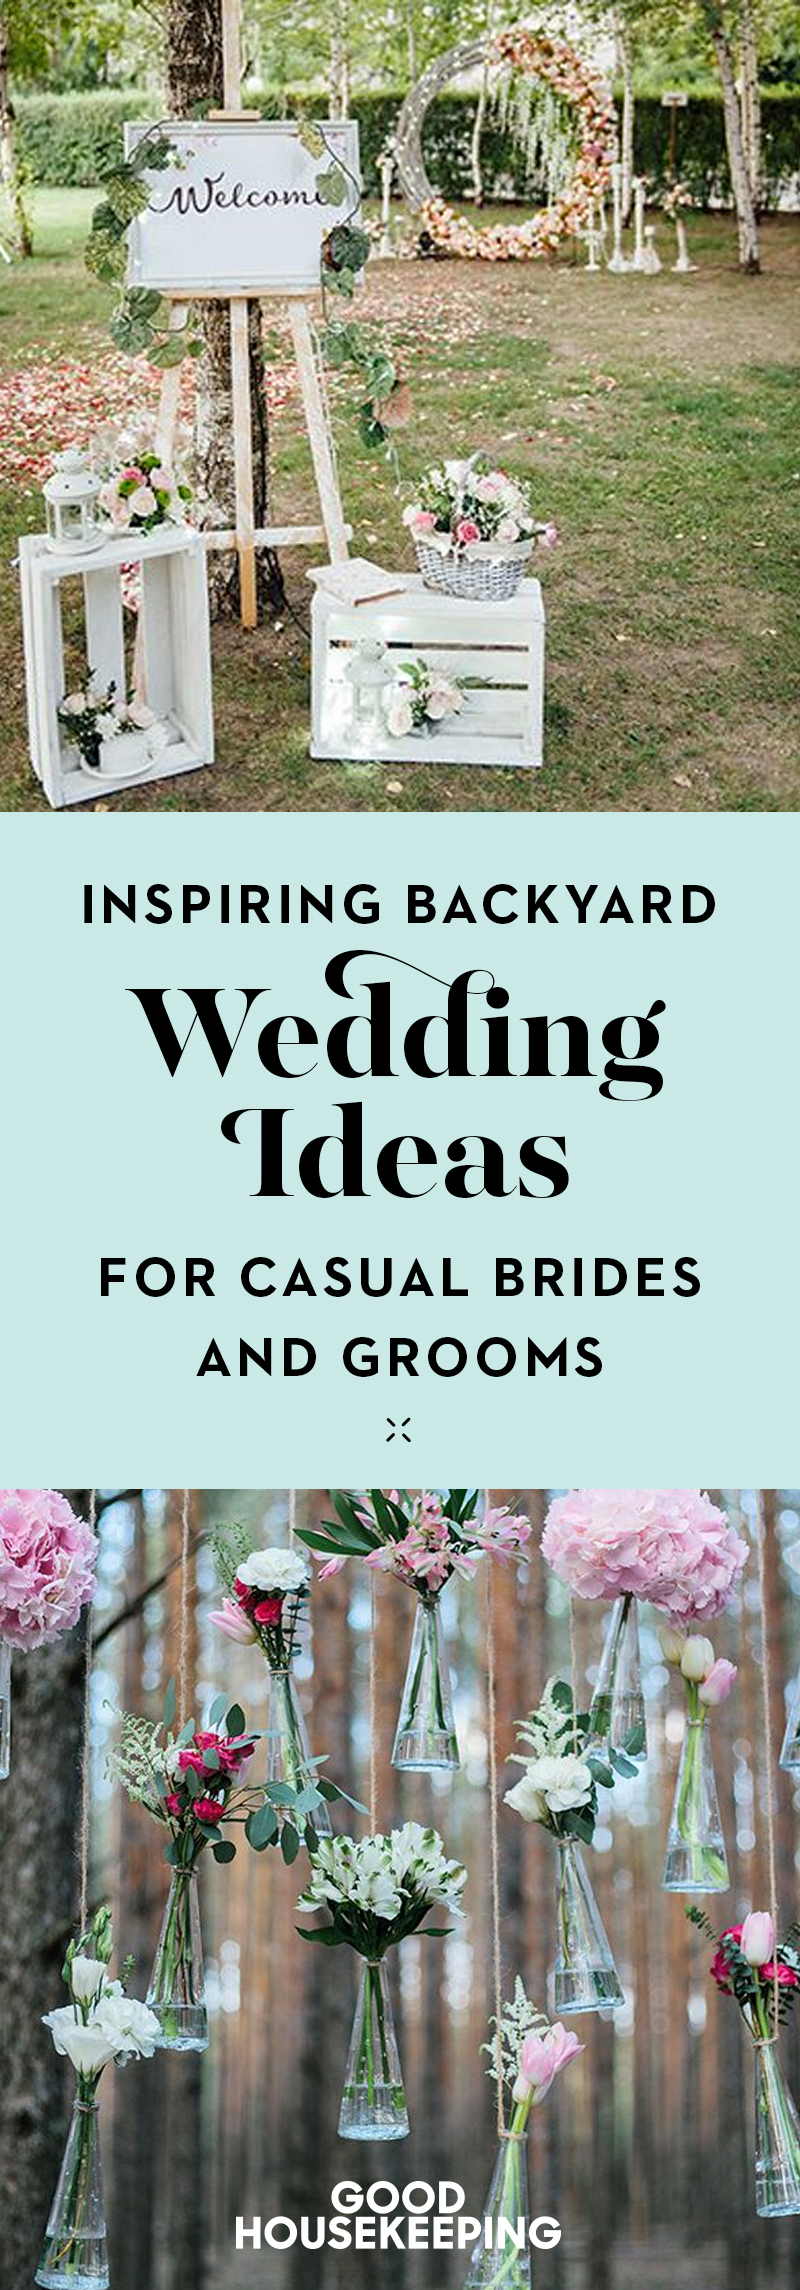 The One Wedding Trend That Isn't Going Anywhere -   17 wedding Backyard reception ideas